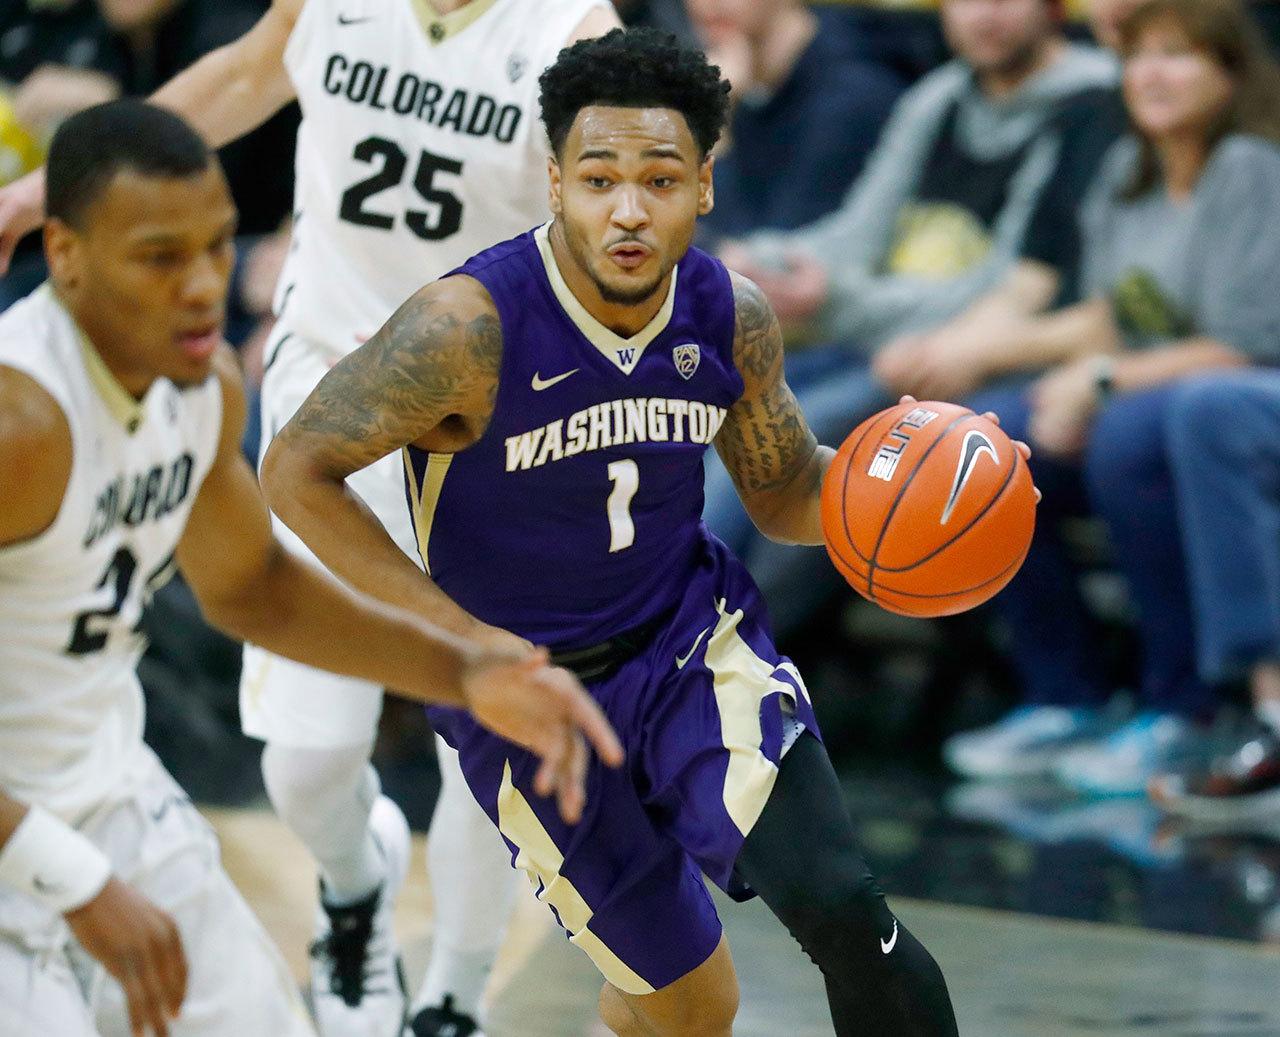 Washington’s David Crisp (right) drives past Colorado’s George King after a steal in the first half of the Huskies’ 81-66 loss to the Buffaloes on Thursday in Boulder, Colo. (AP Photo/David Zalubowski)